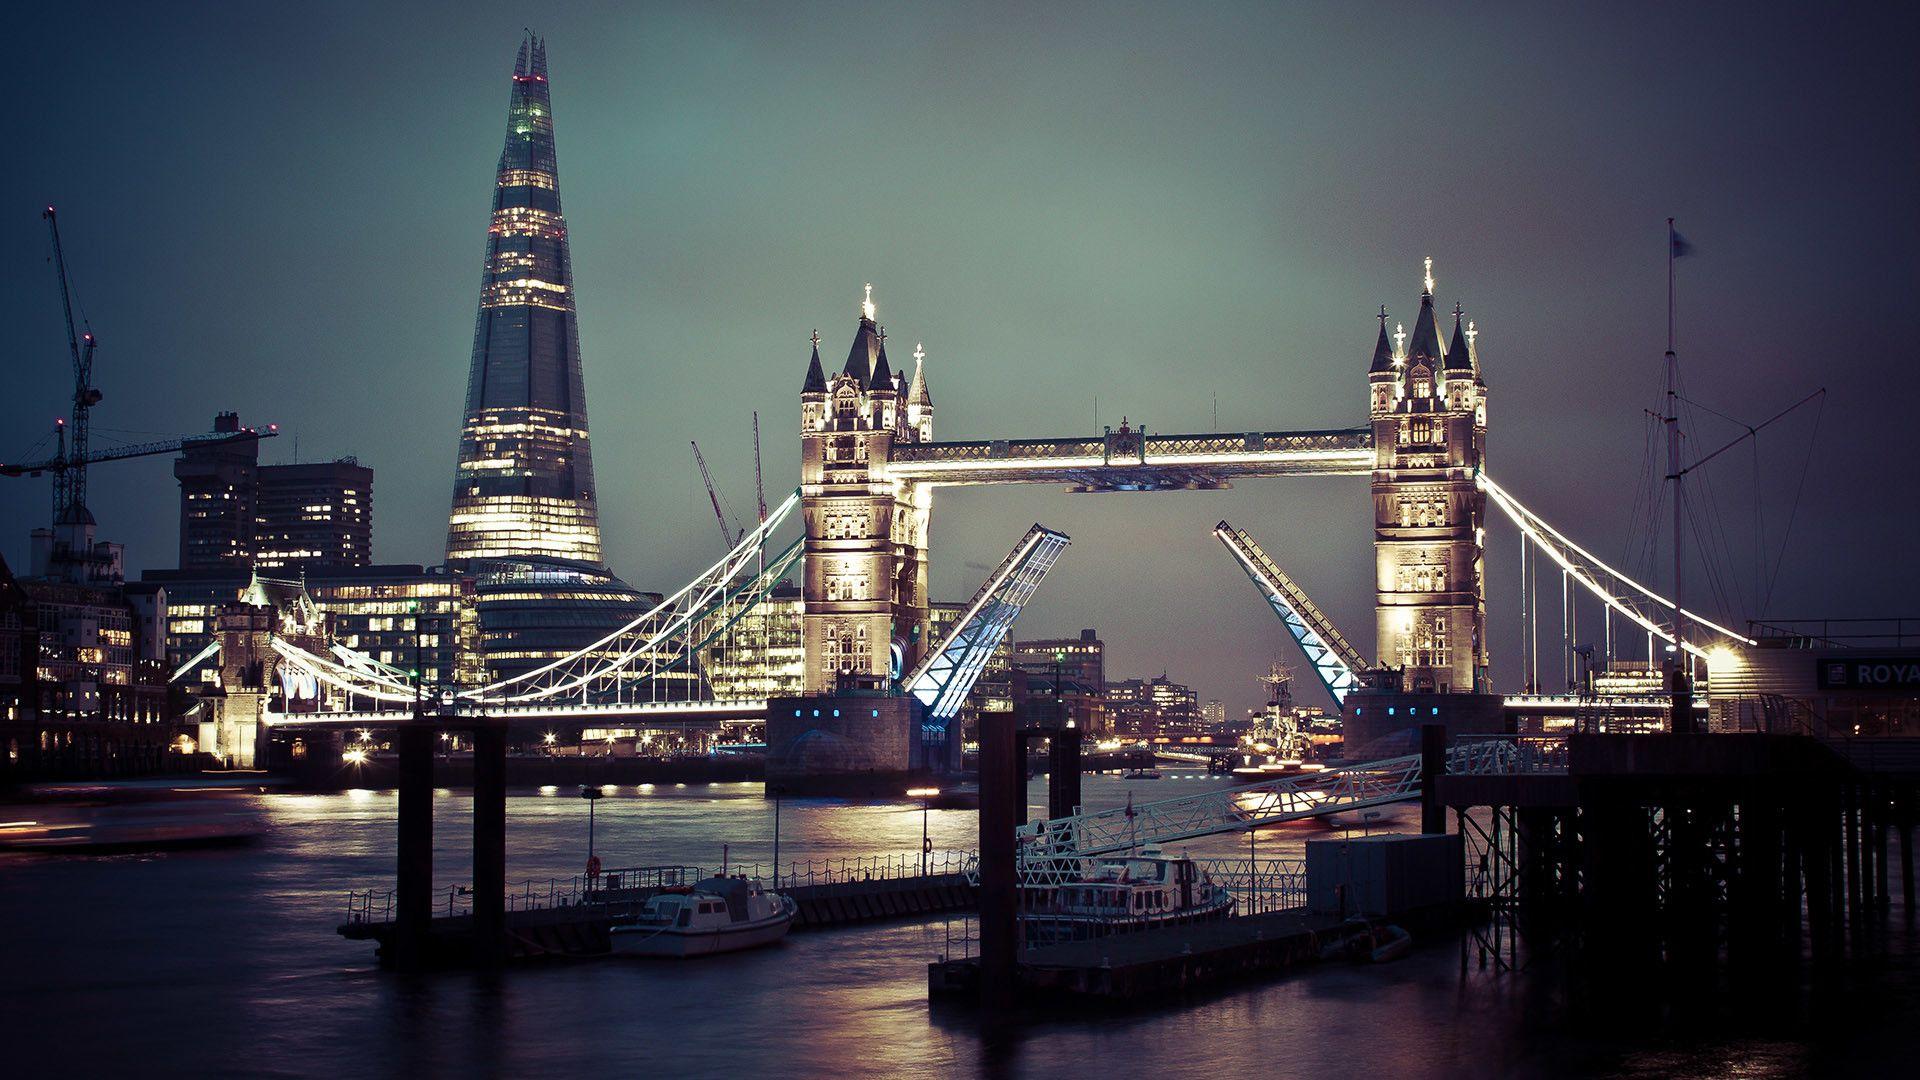 London Skyline at Night Wallpapers - Top Free London Skyline at Night